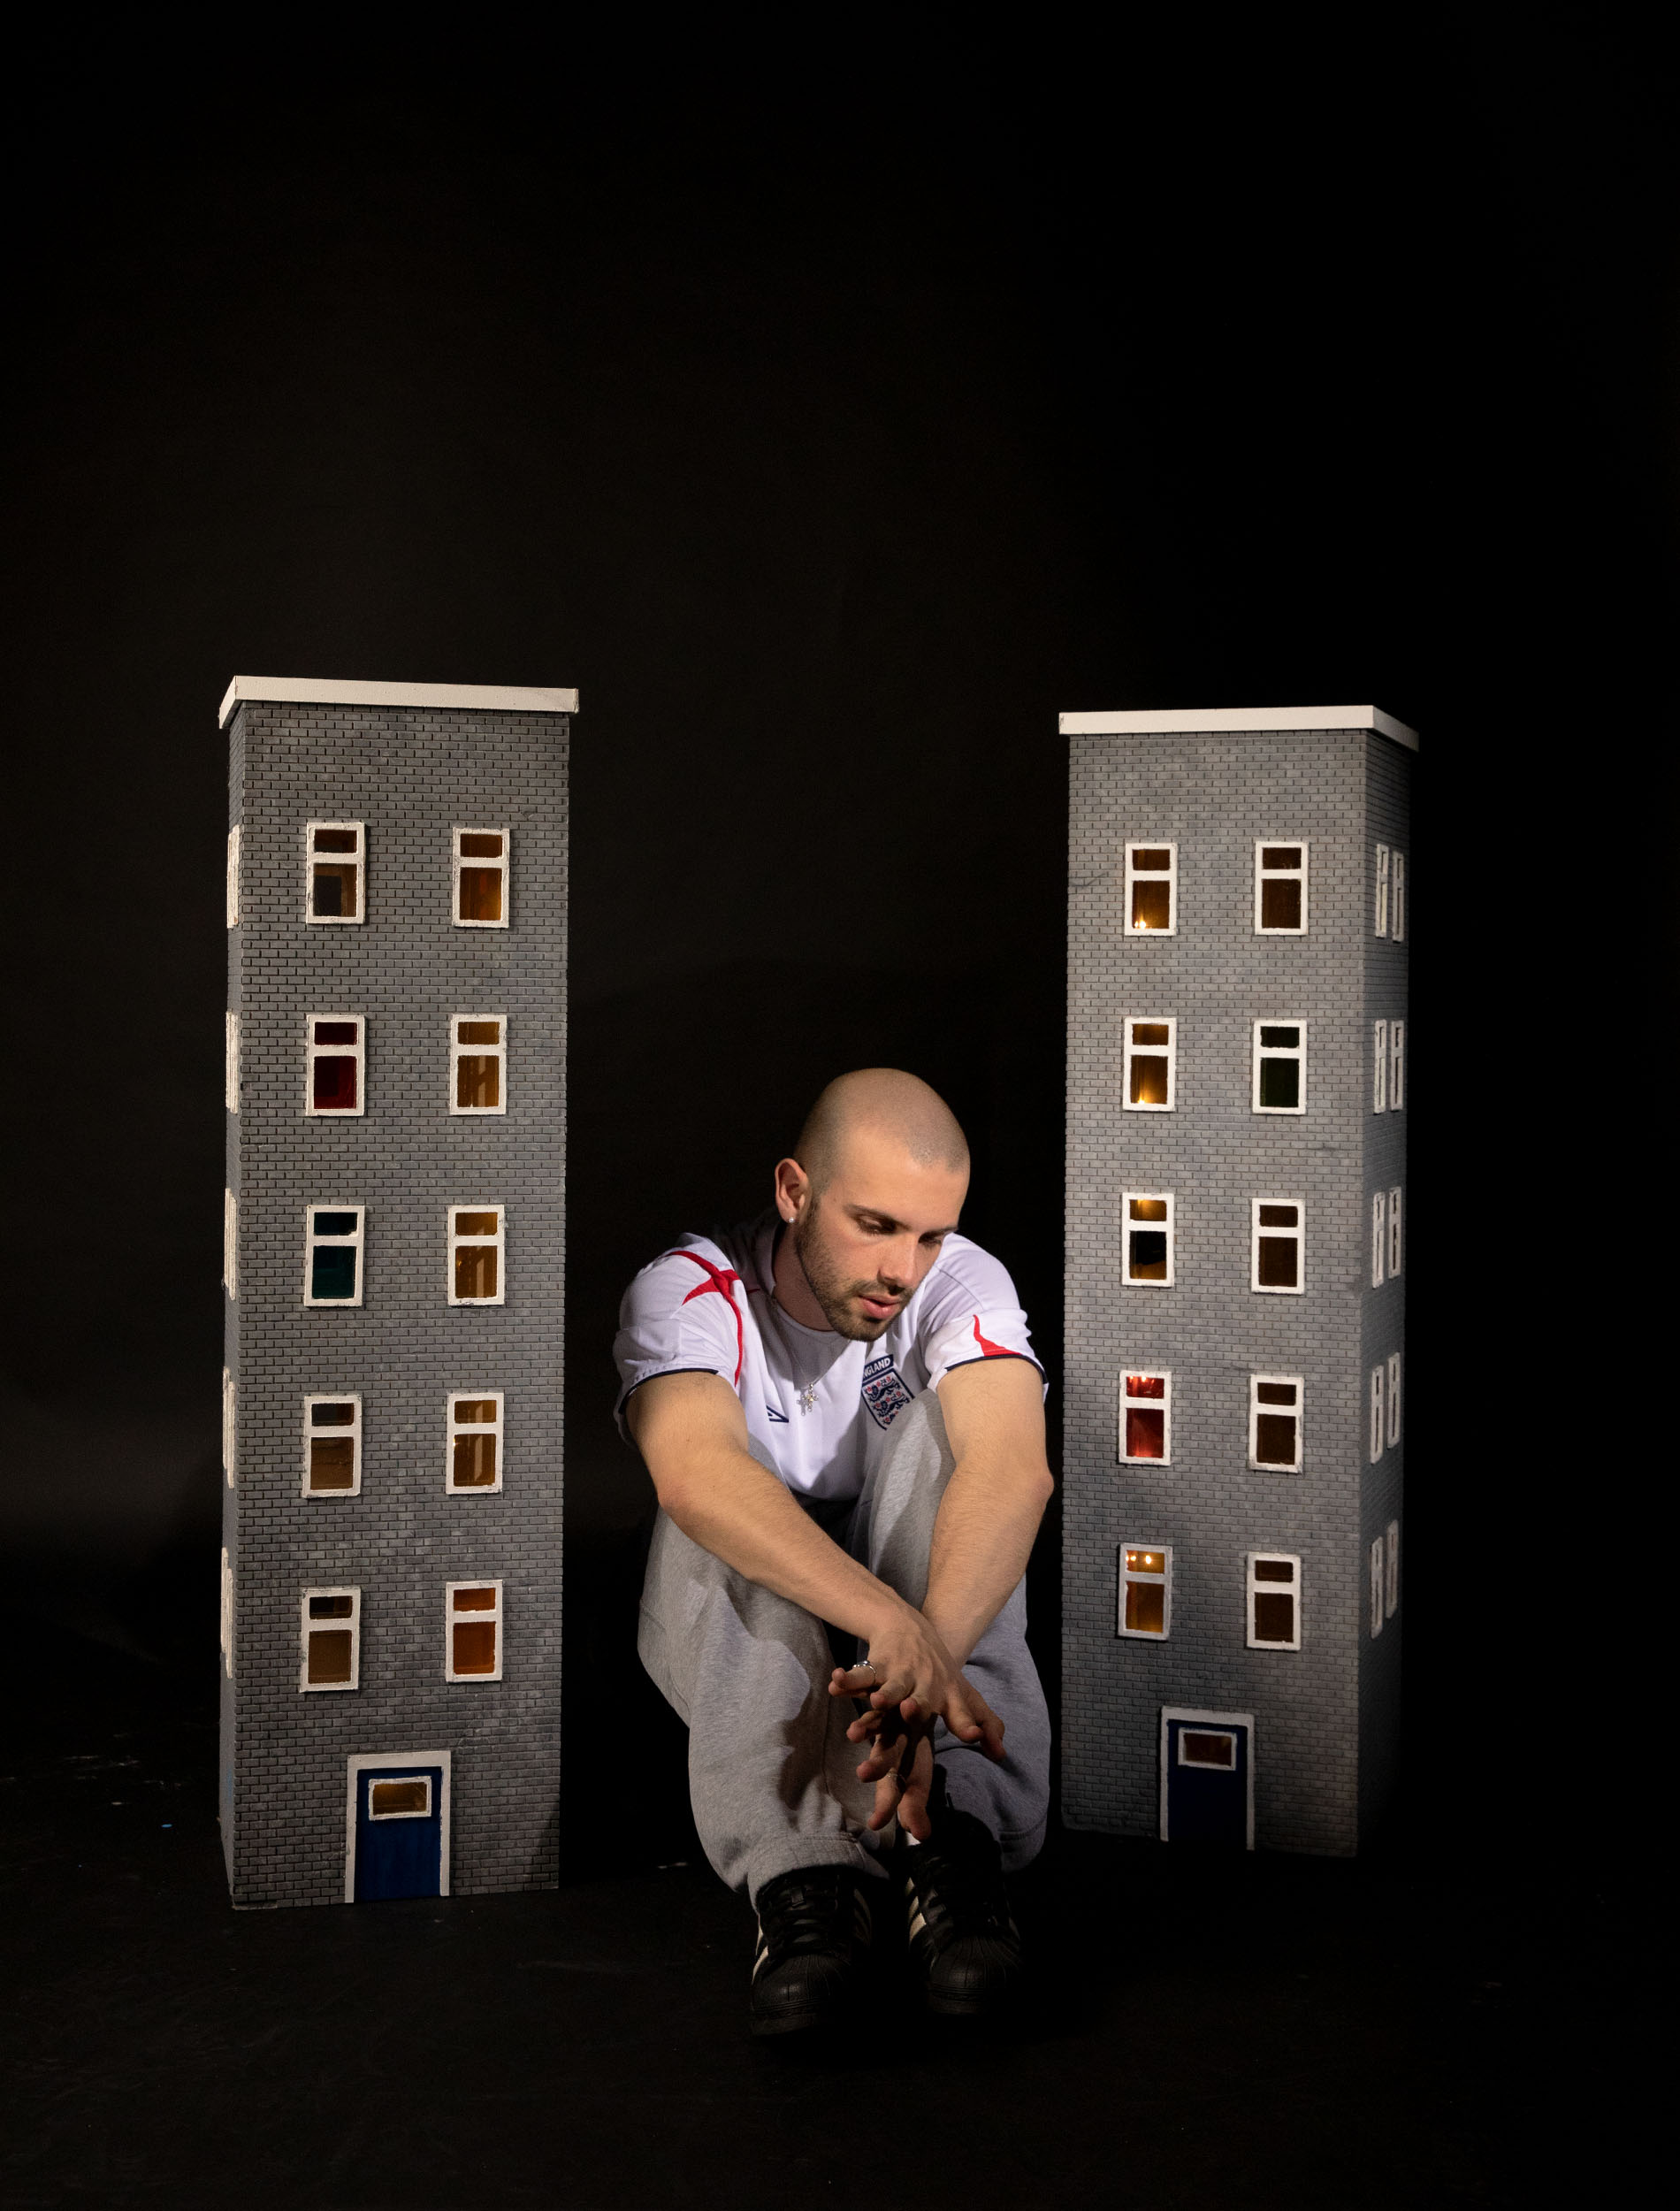 Set Design and Art Directed by Annie Wicks showing an striking image of a man sitting between two model estate flat blocks.